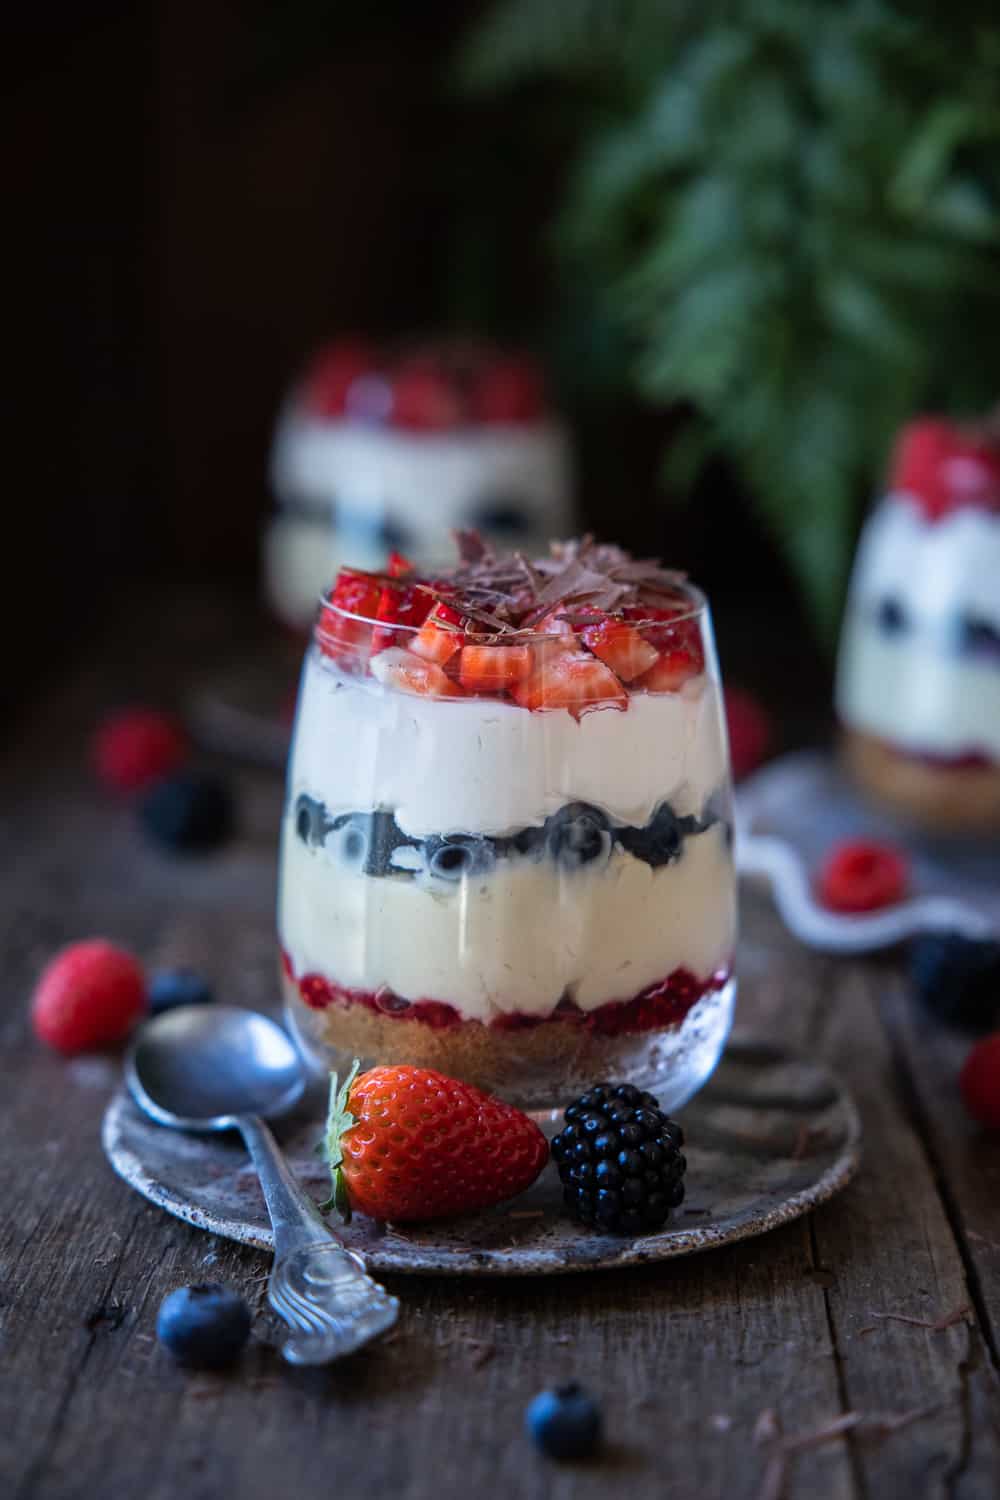 Trifle cup with two others blurred in the background